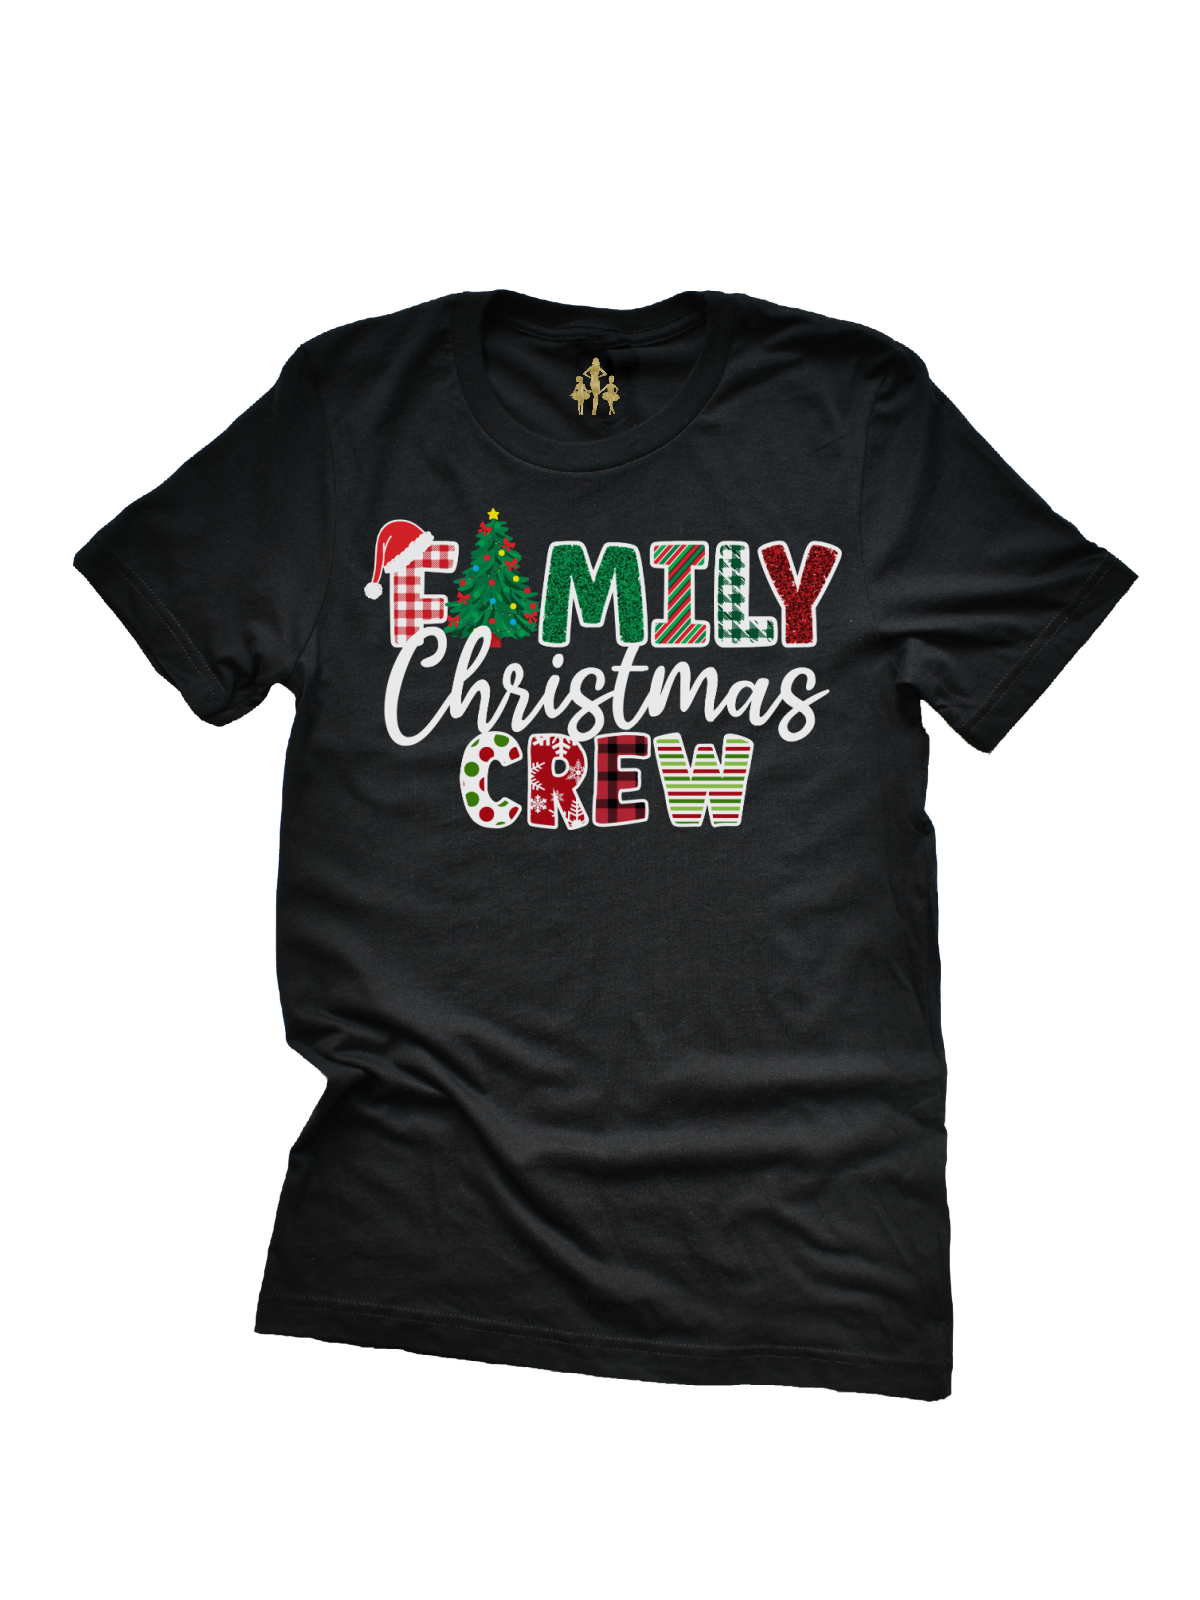 Adult Family Christmas Crew Shirt in Black